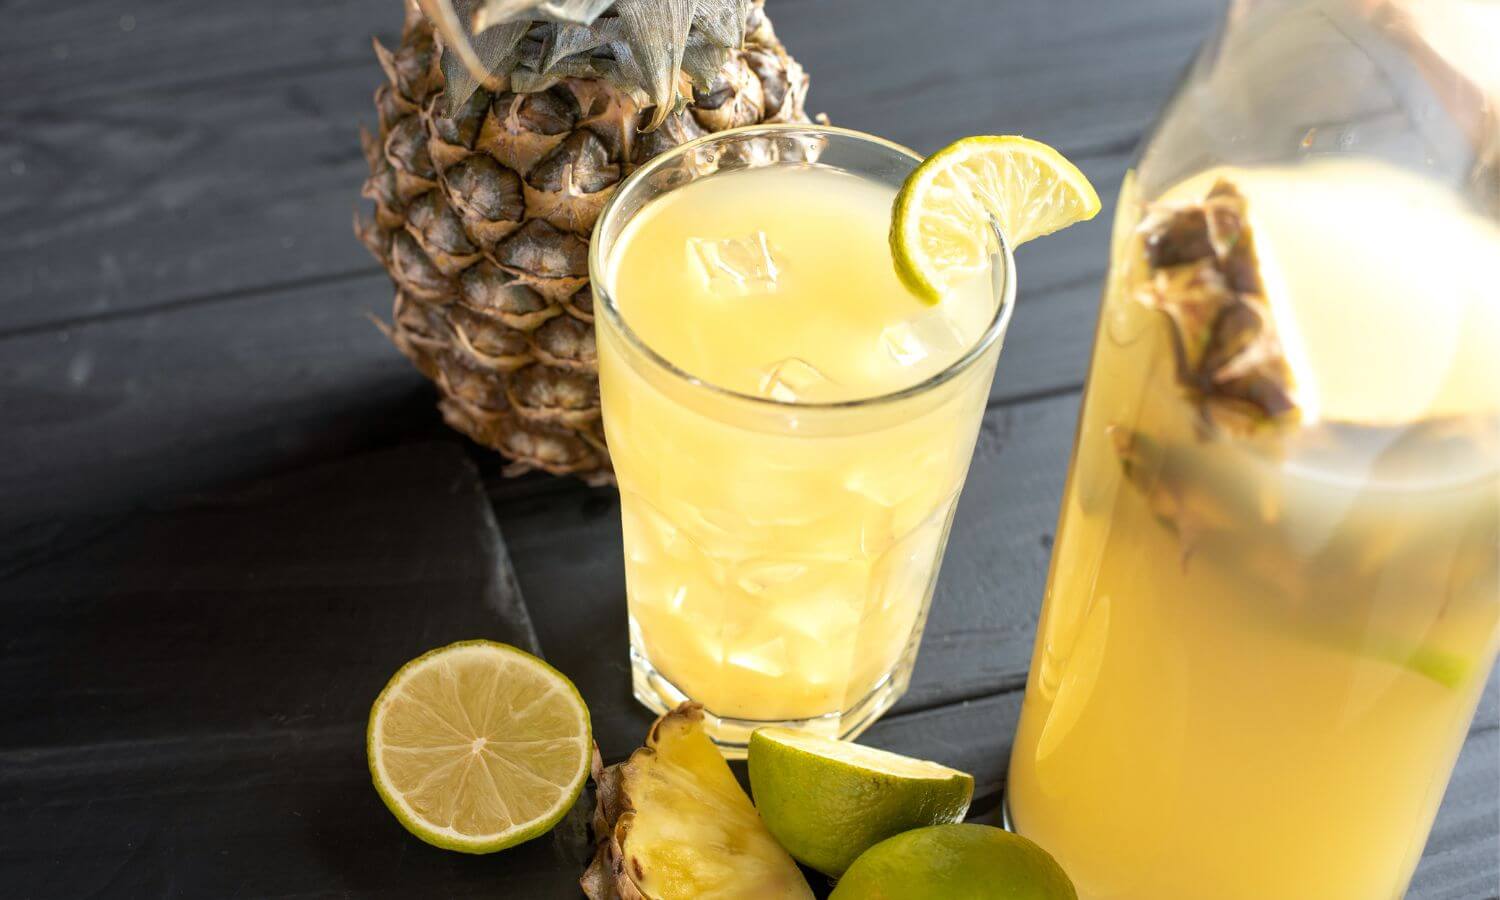 Tepache or pineapple beer. A refreshing homemade drink.